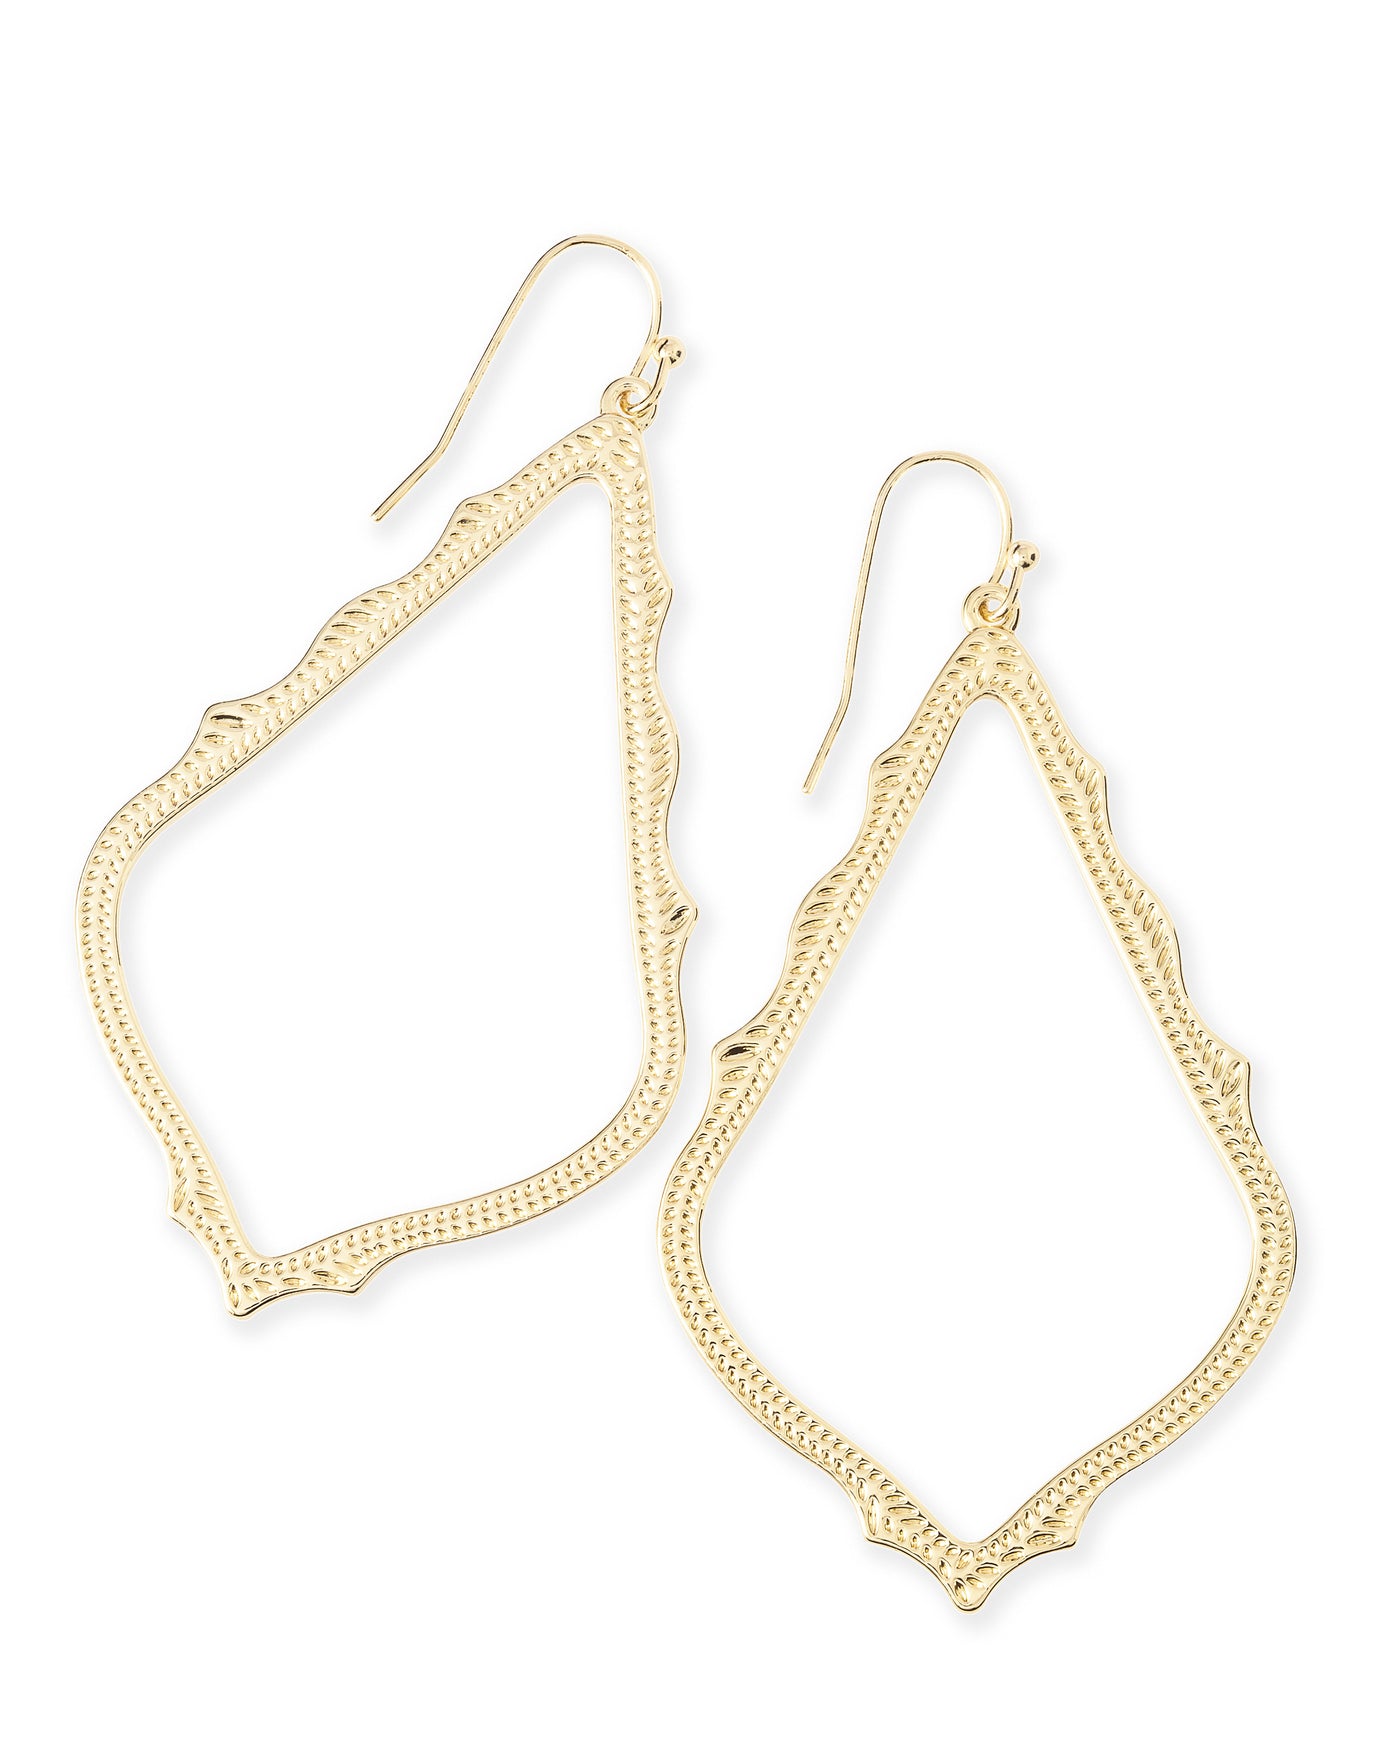 Kendra Scott Sophee Earrings in Gold-Earrings-Kendra Scott-Market Street Nest, Fashionable Clothing, Shoes and Home Décor Located in Mabank, TX